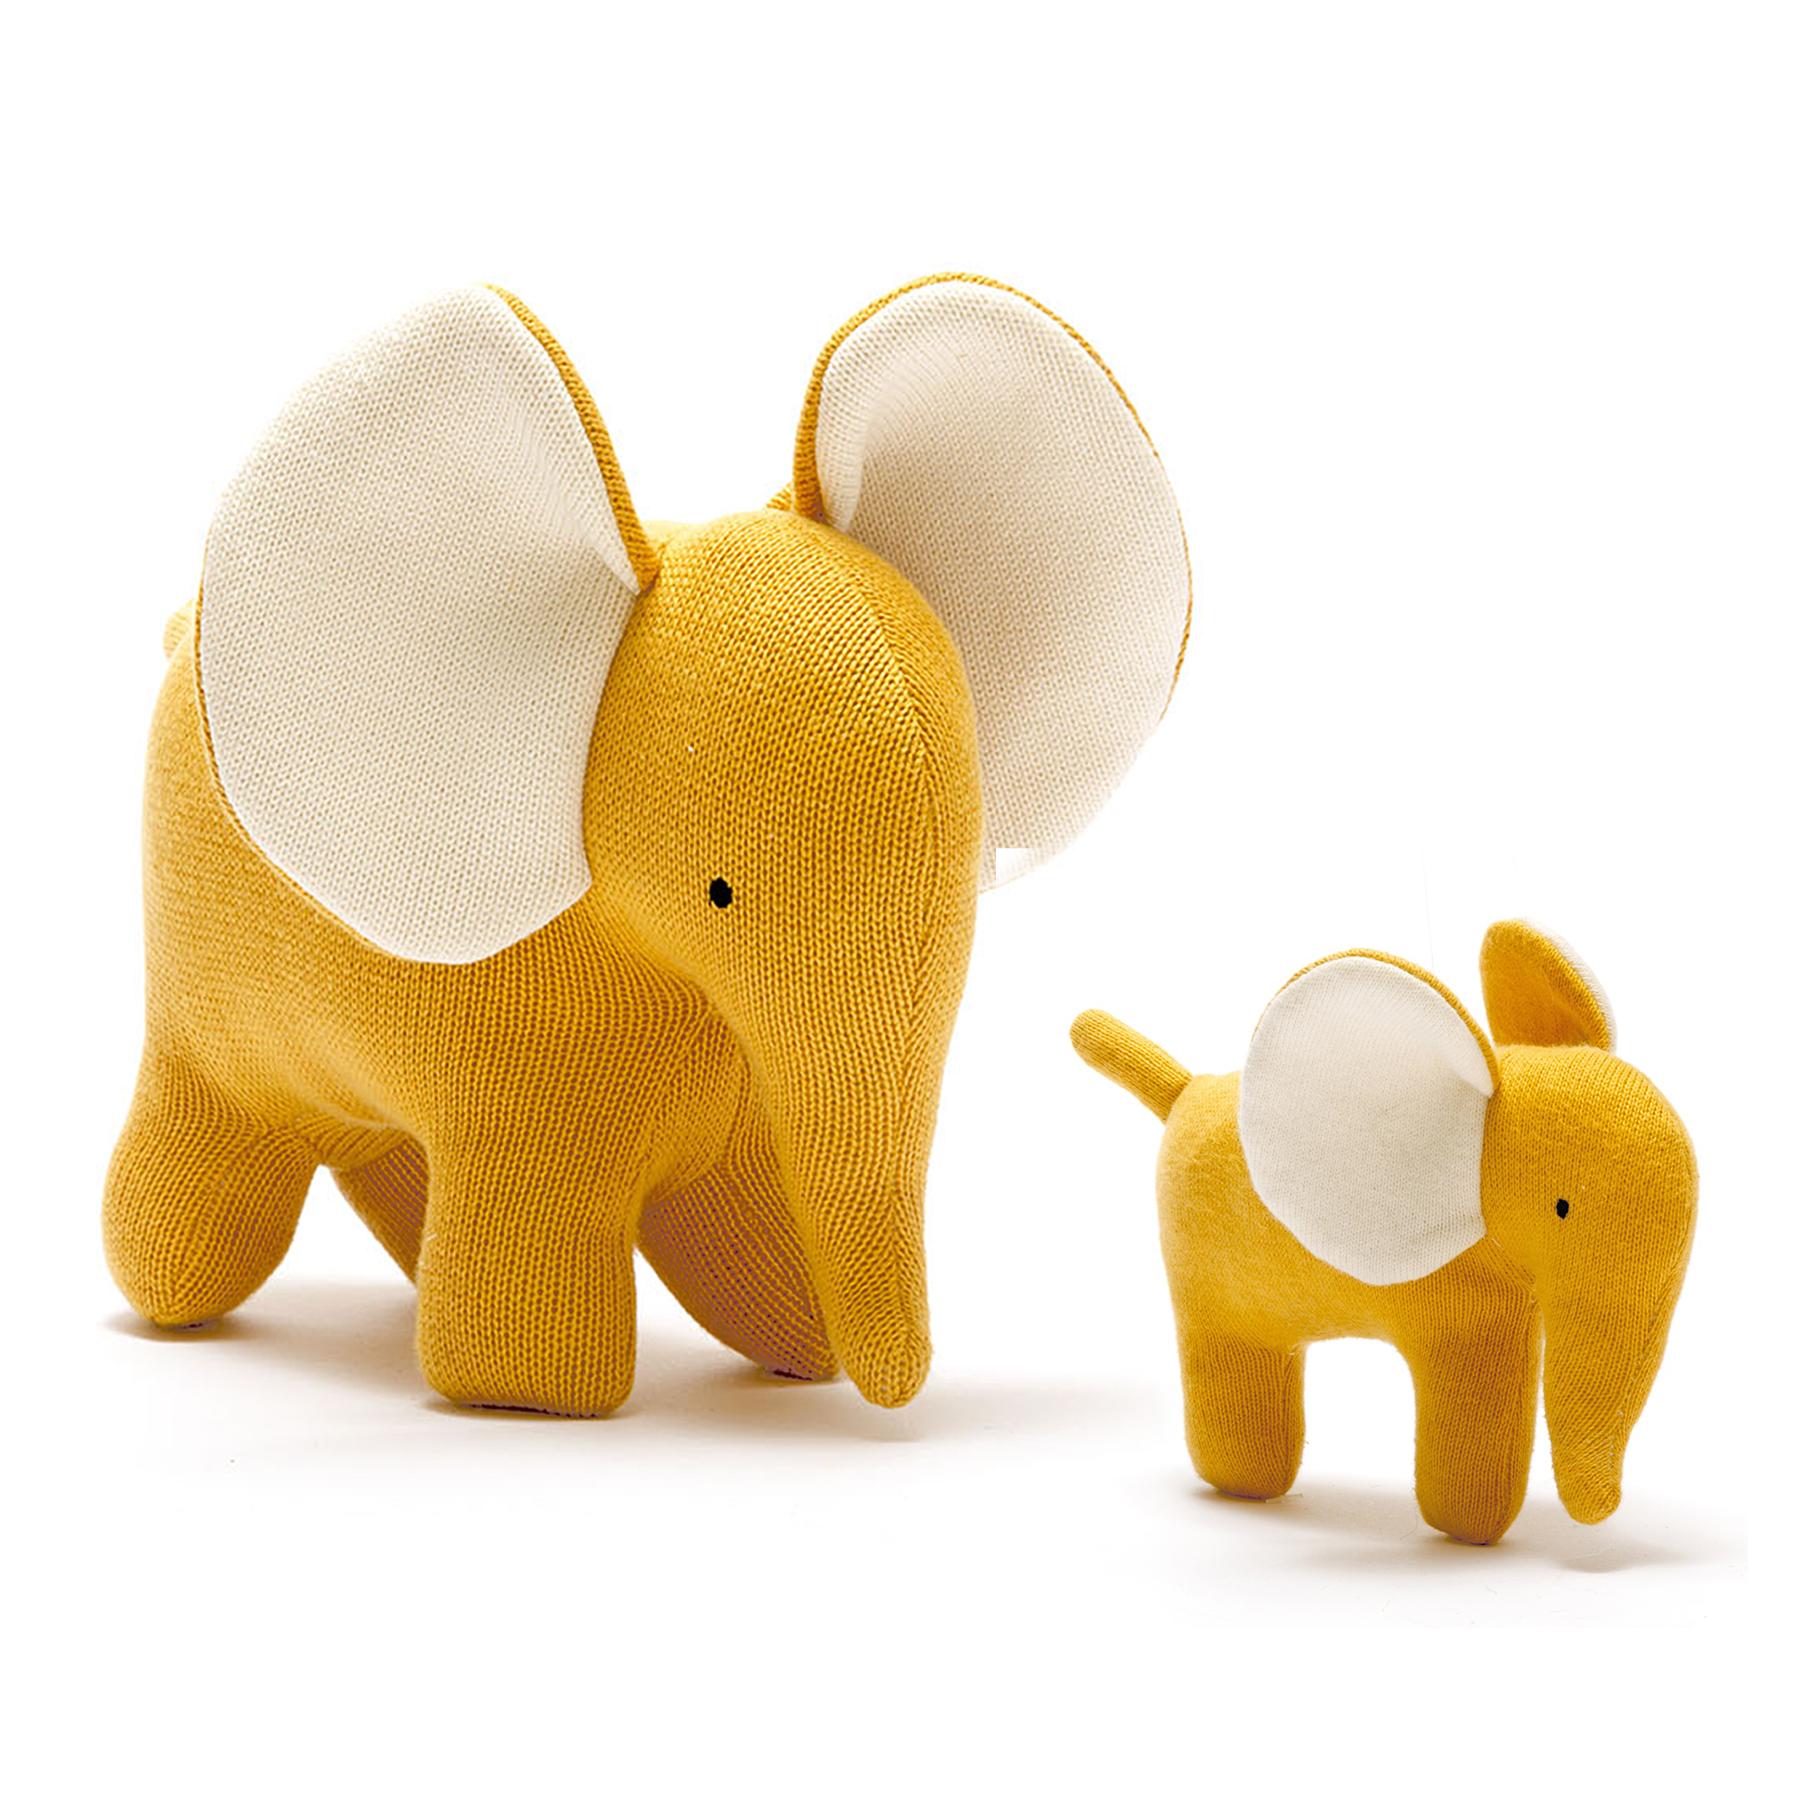 Best Years Knitted Large Organic Cotton Mustard Elephant large & small